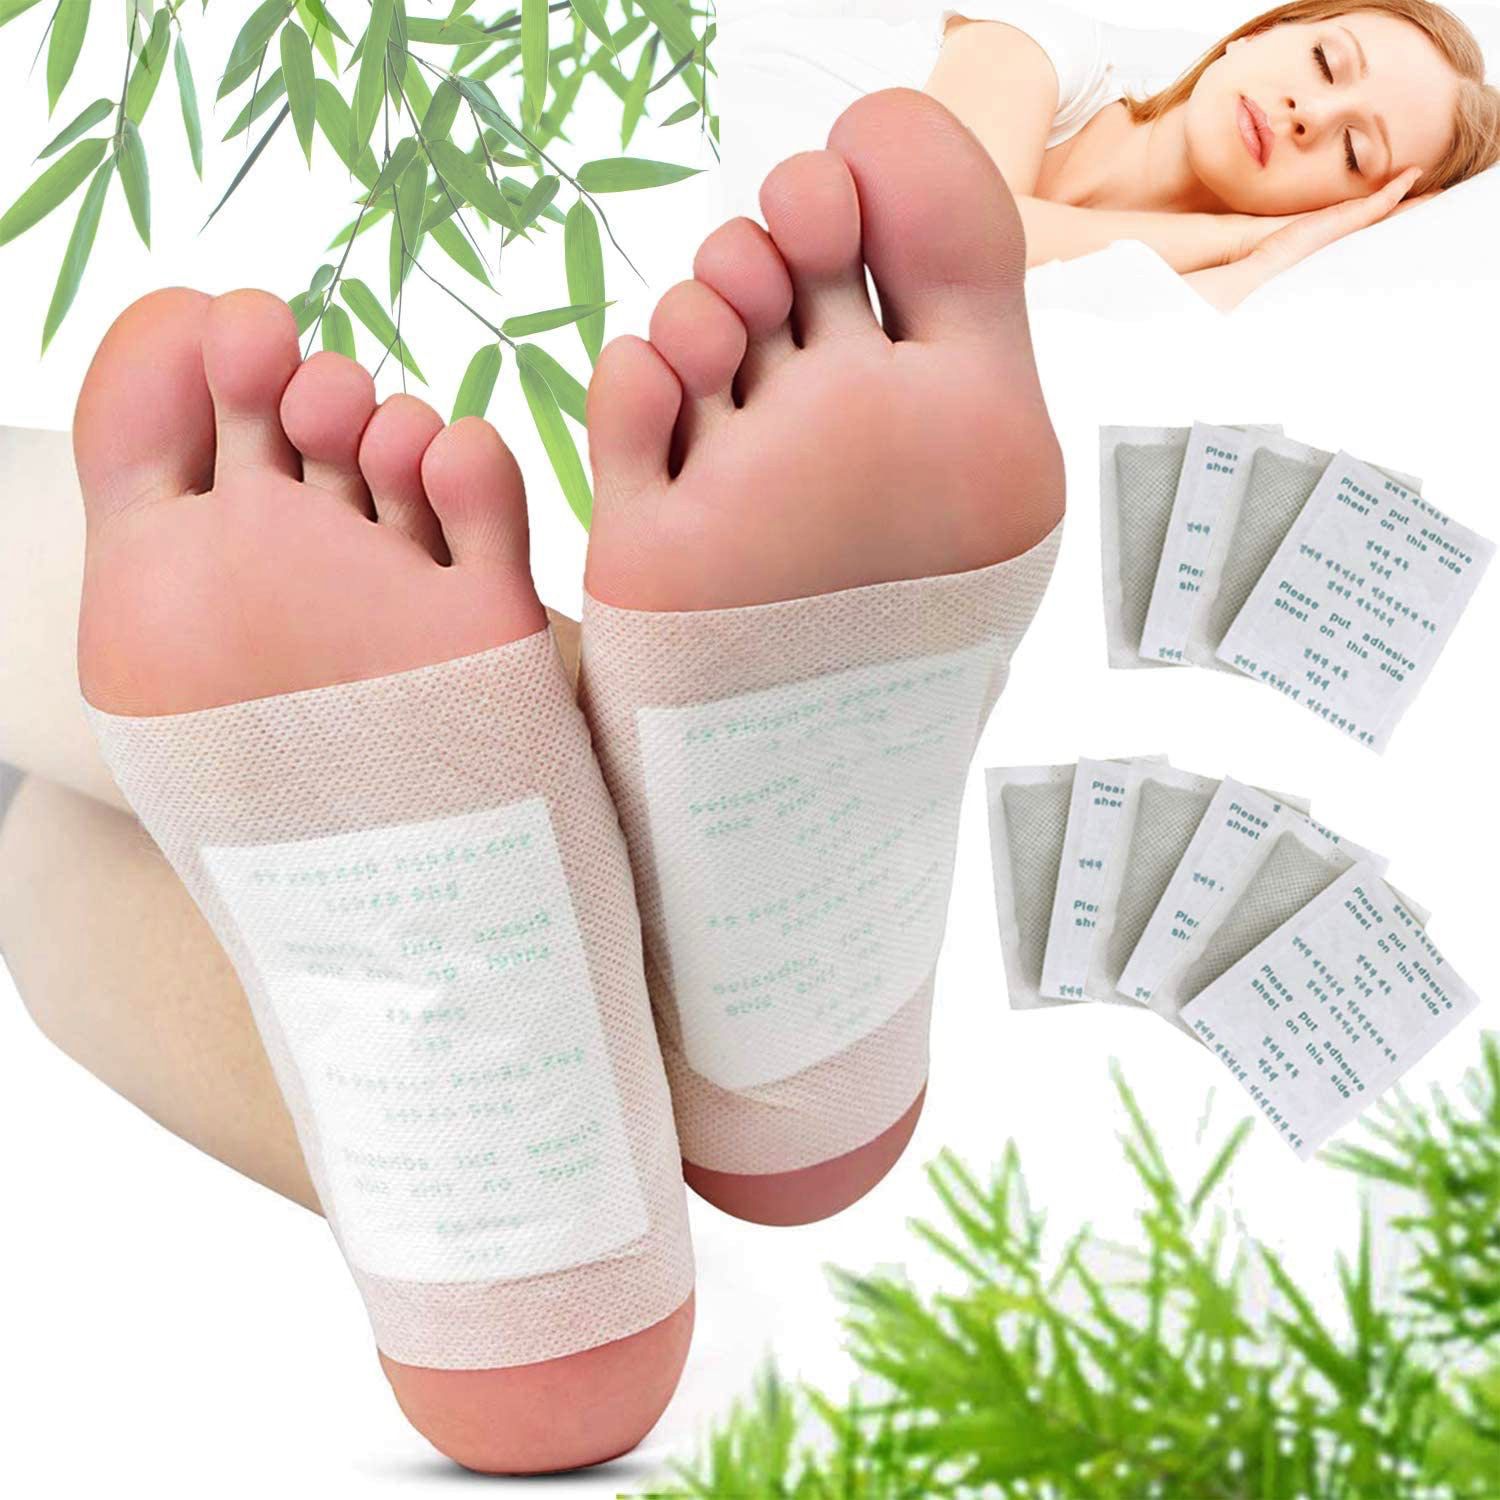 Foot Pads: 100 Relief Foot Pads and 100 Adhesive Sheets for Removing Impurities, Relieve Stress Improve Sleep